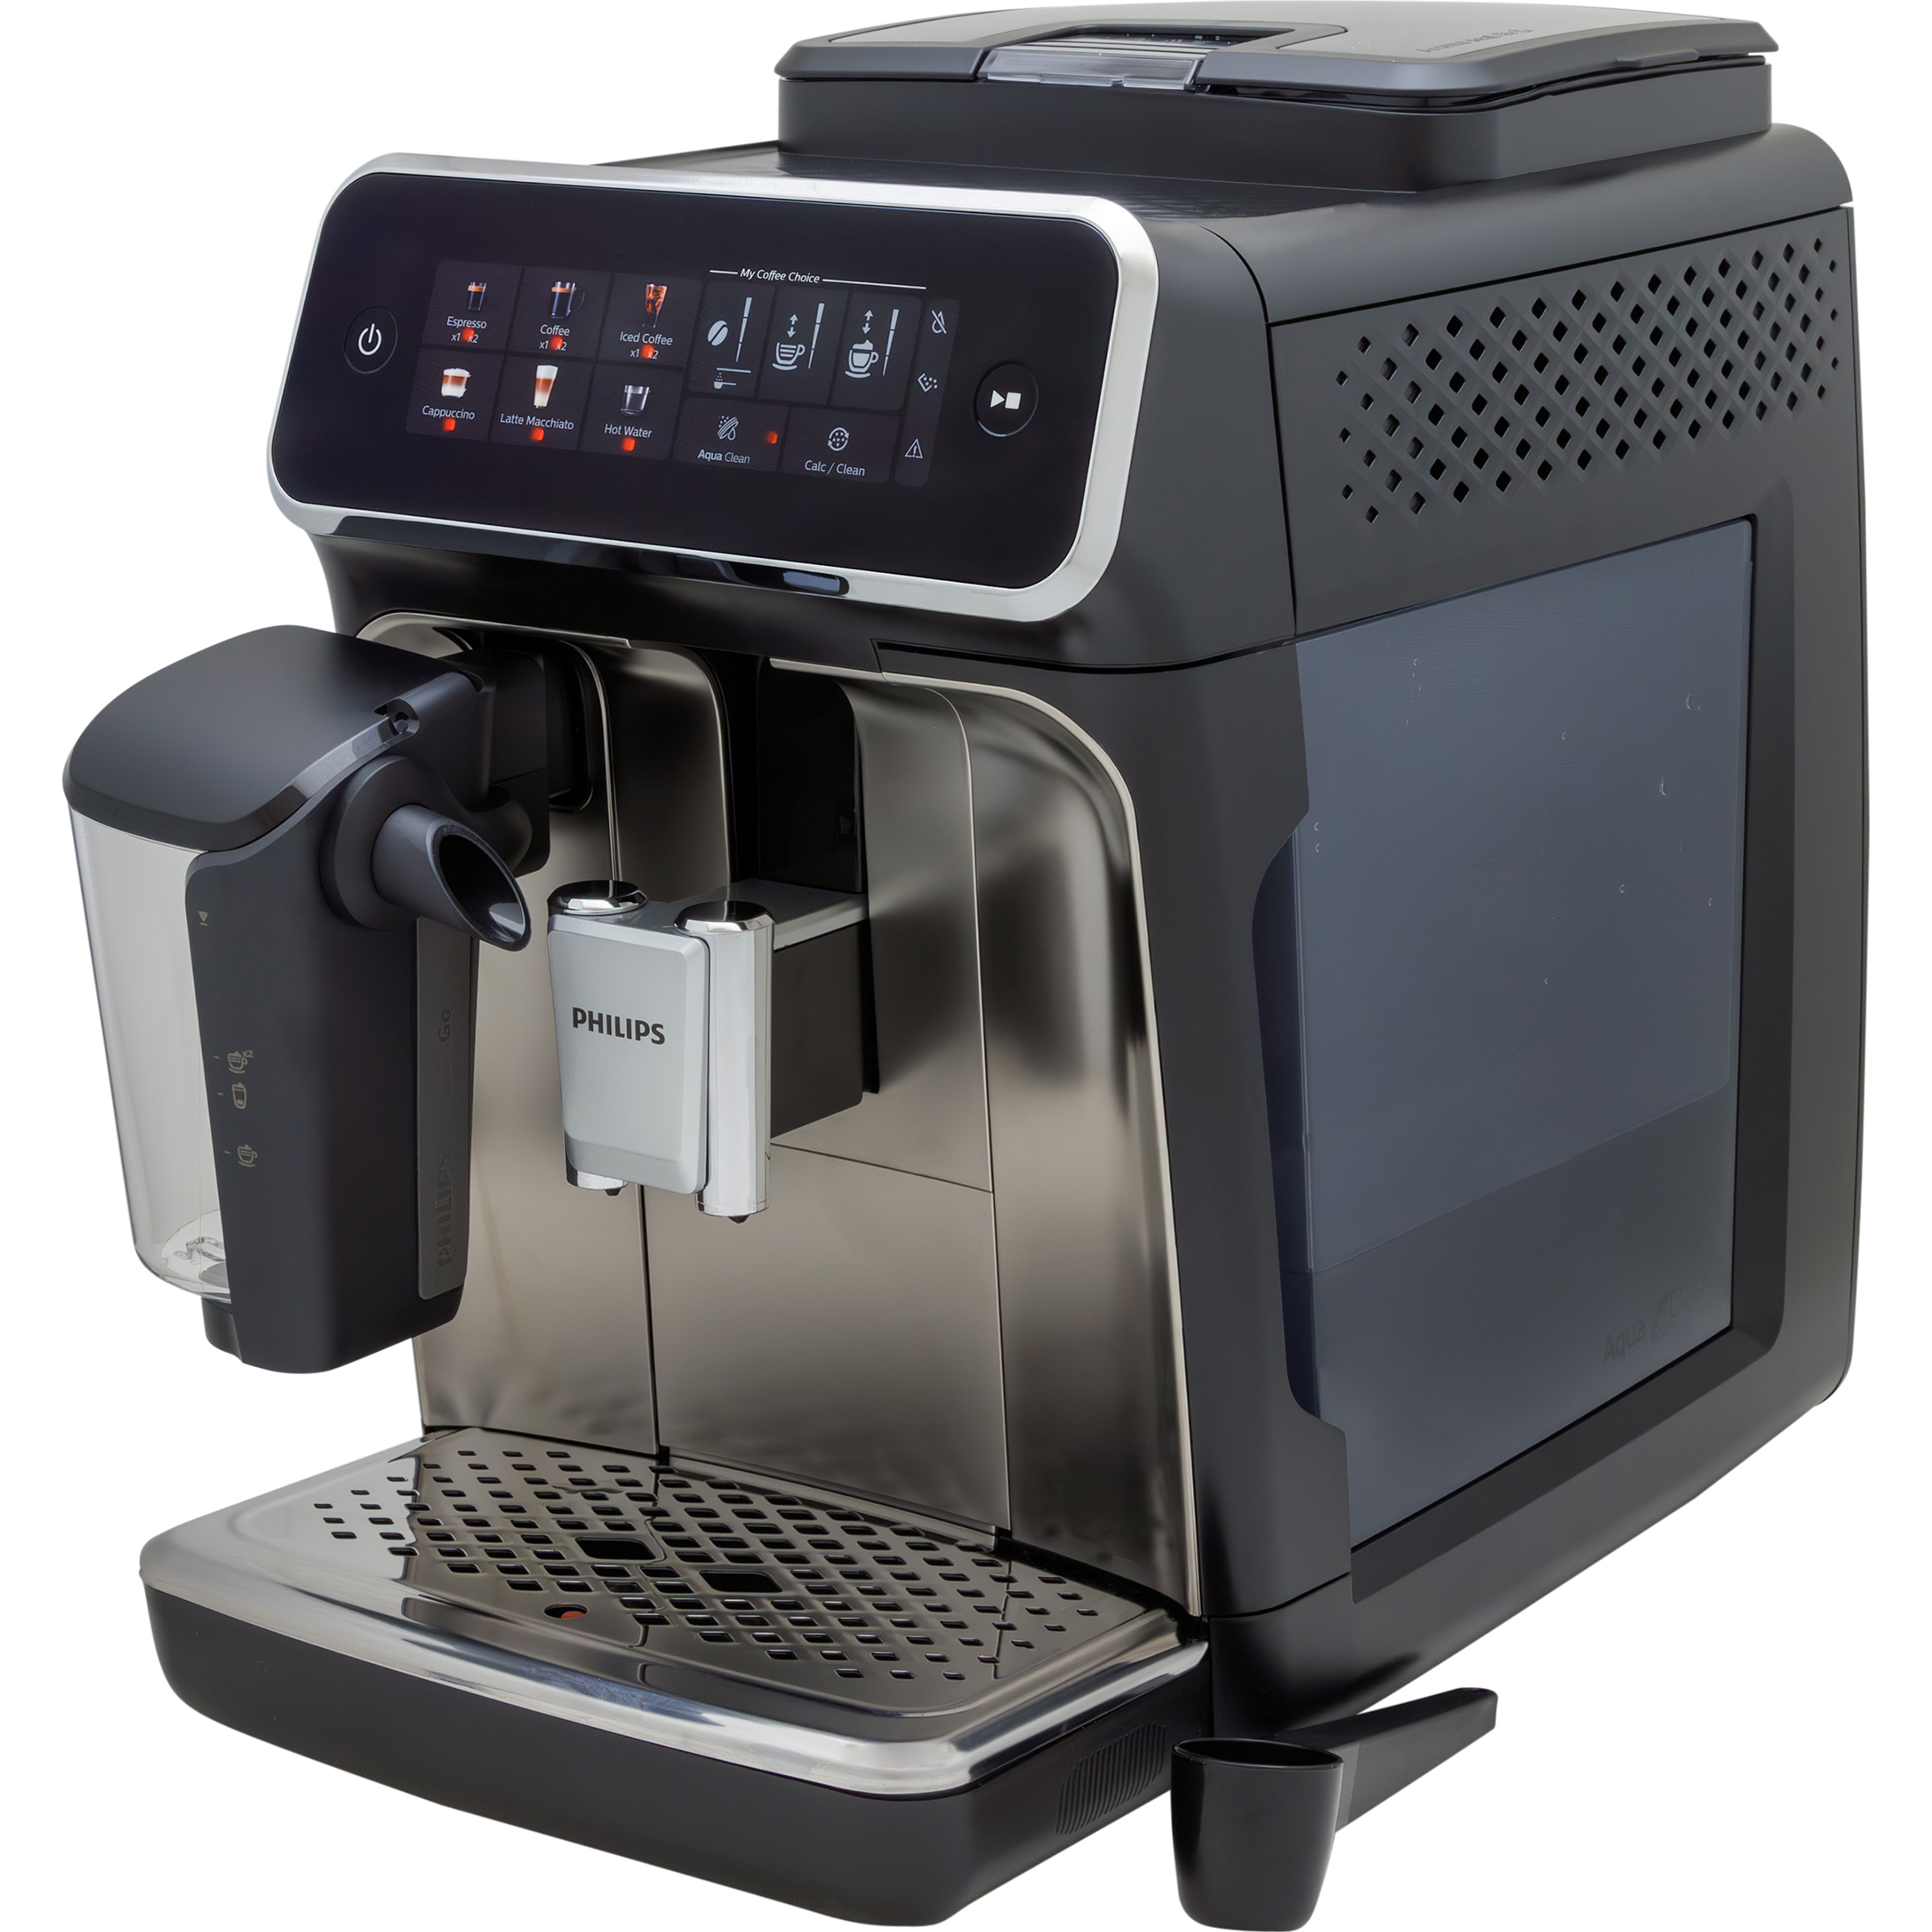 https://imtc.qccdn.fr/test/cafetiere-a-expresso-avec-broyeur-a-grains/zoom/phillips-3340-serie-lattego-ep3347-90_001.jpg